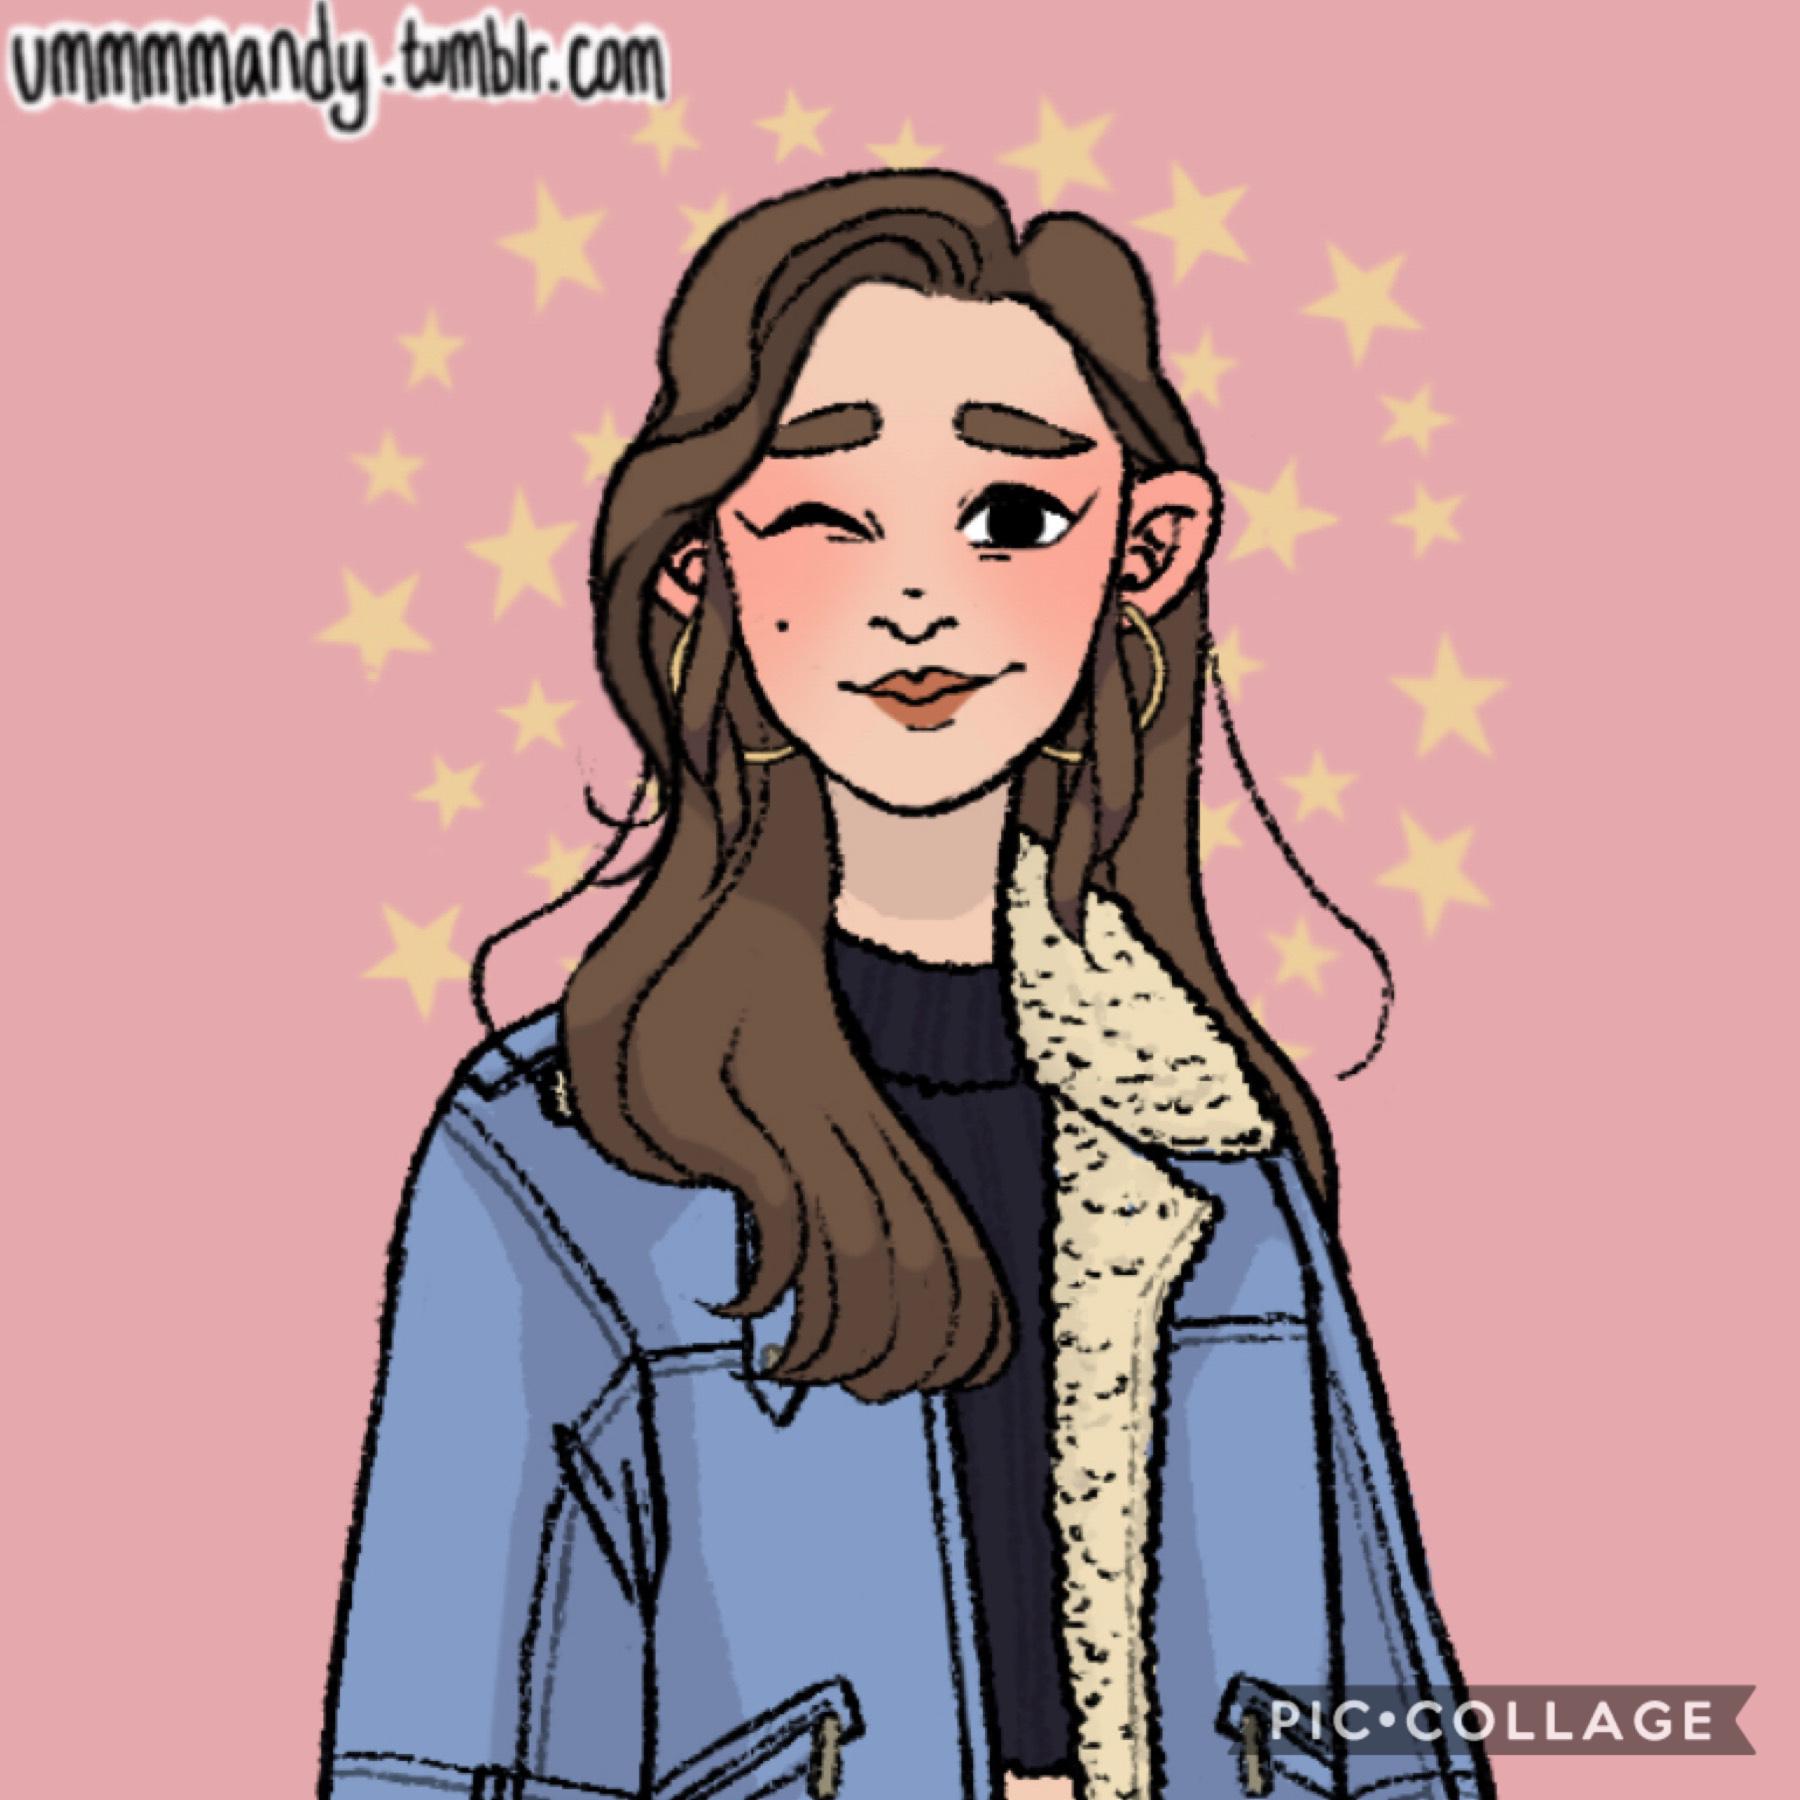 here’s another little thingy of me :) 
credit to raylas for the inspiration ! 